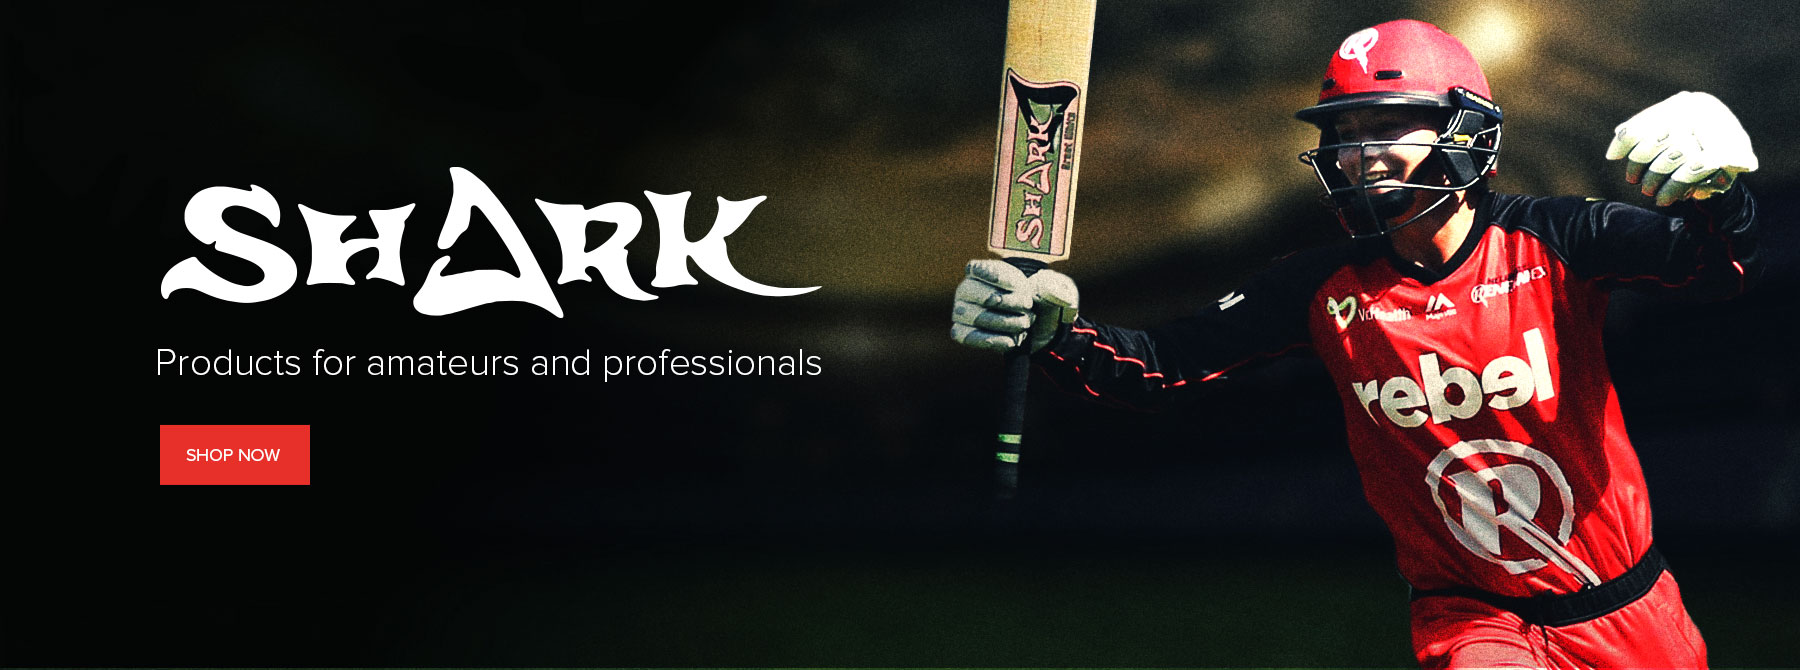 Shark Cricket | Products for amateurs and professionals